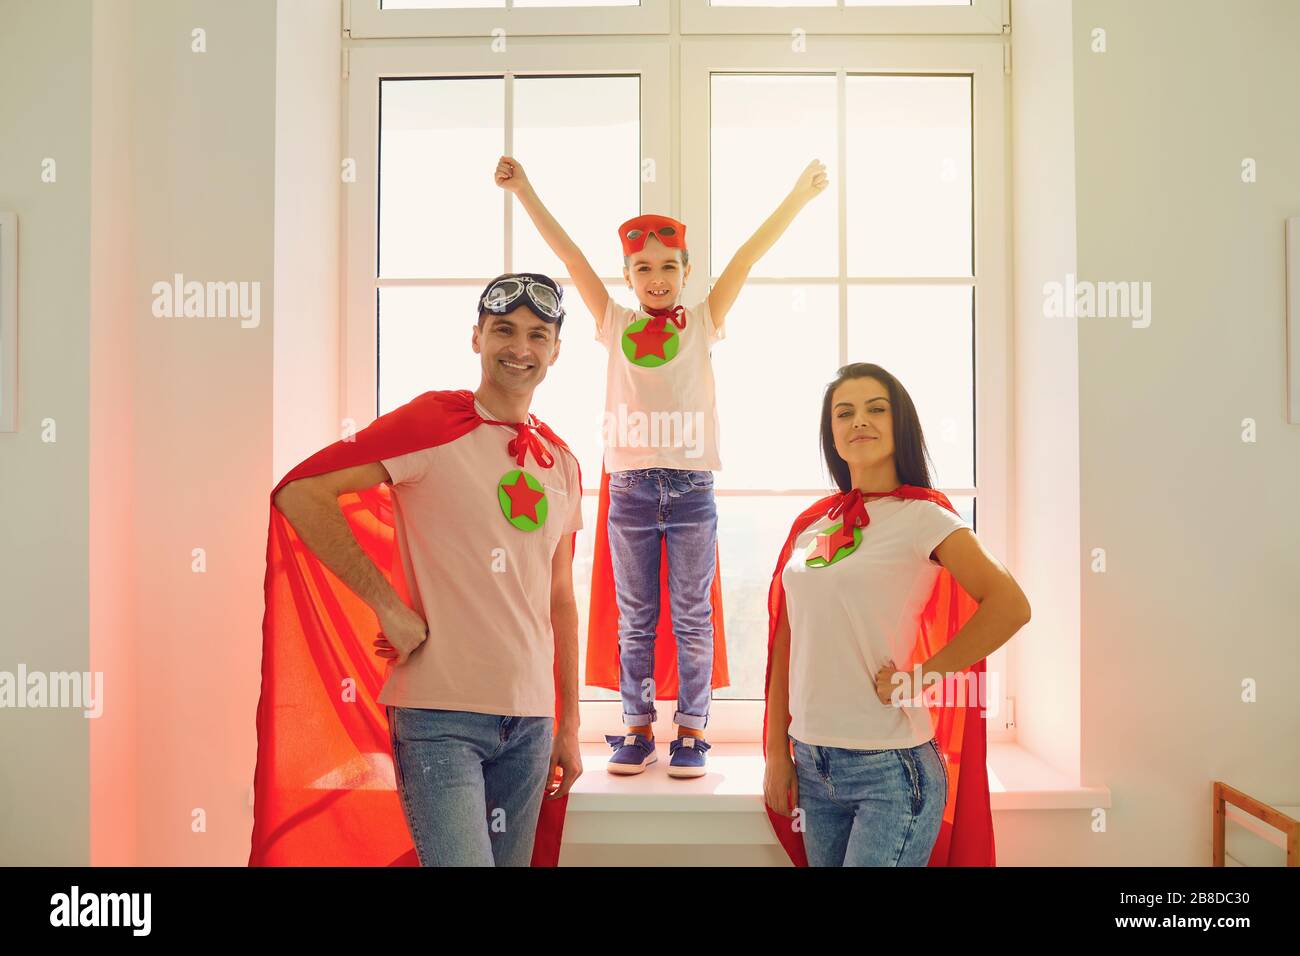 Happy cheerful family in costumes of super heroes laughing while standing against the background of a window in a room indoors. Stock Photo